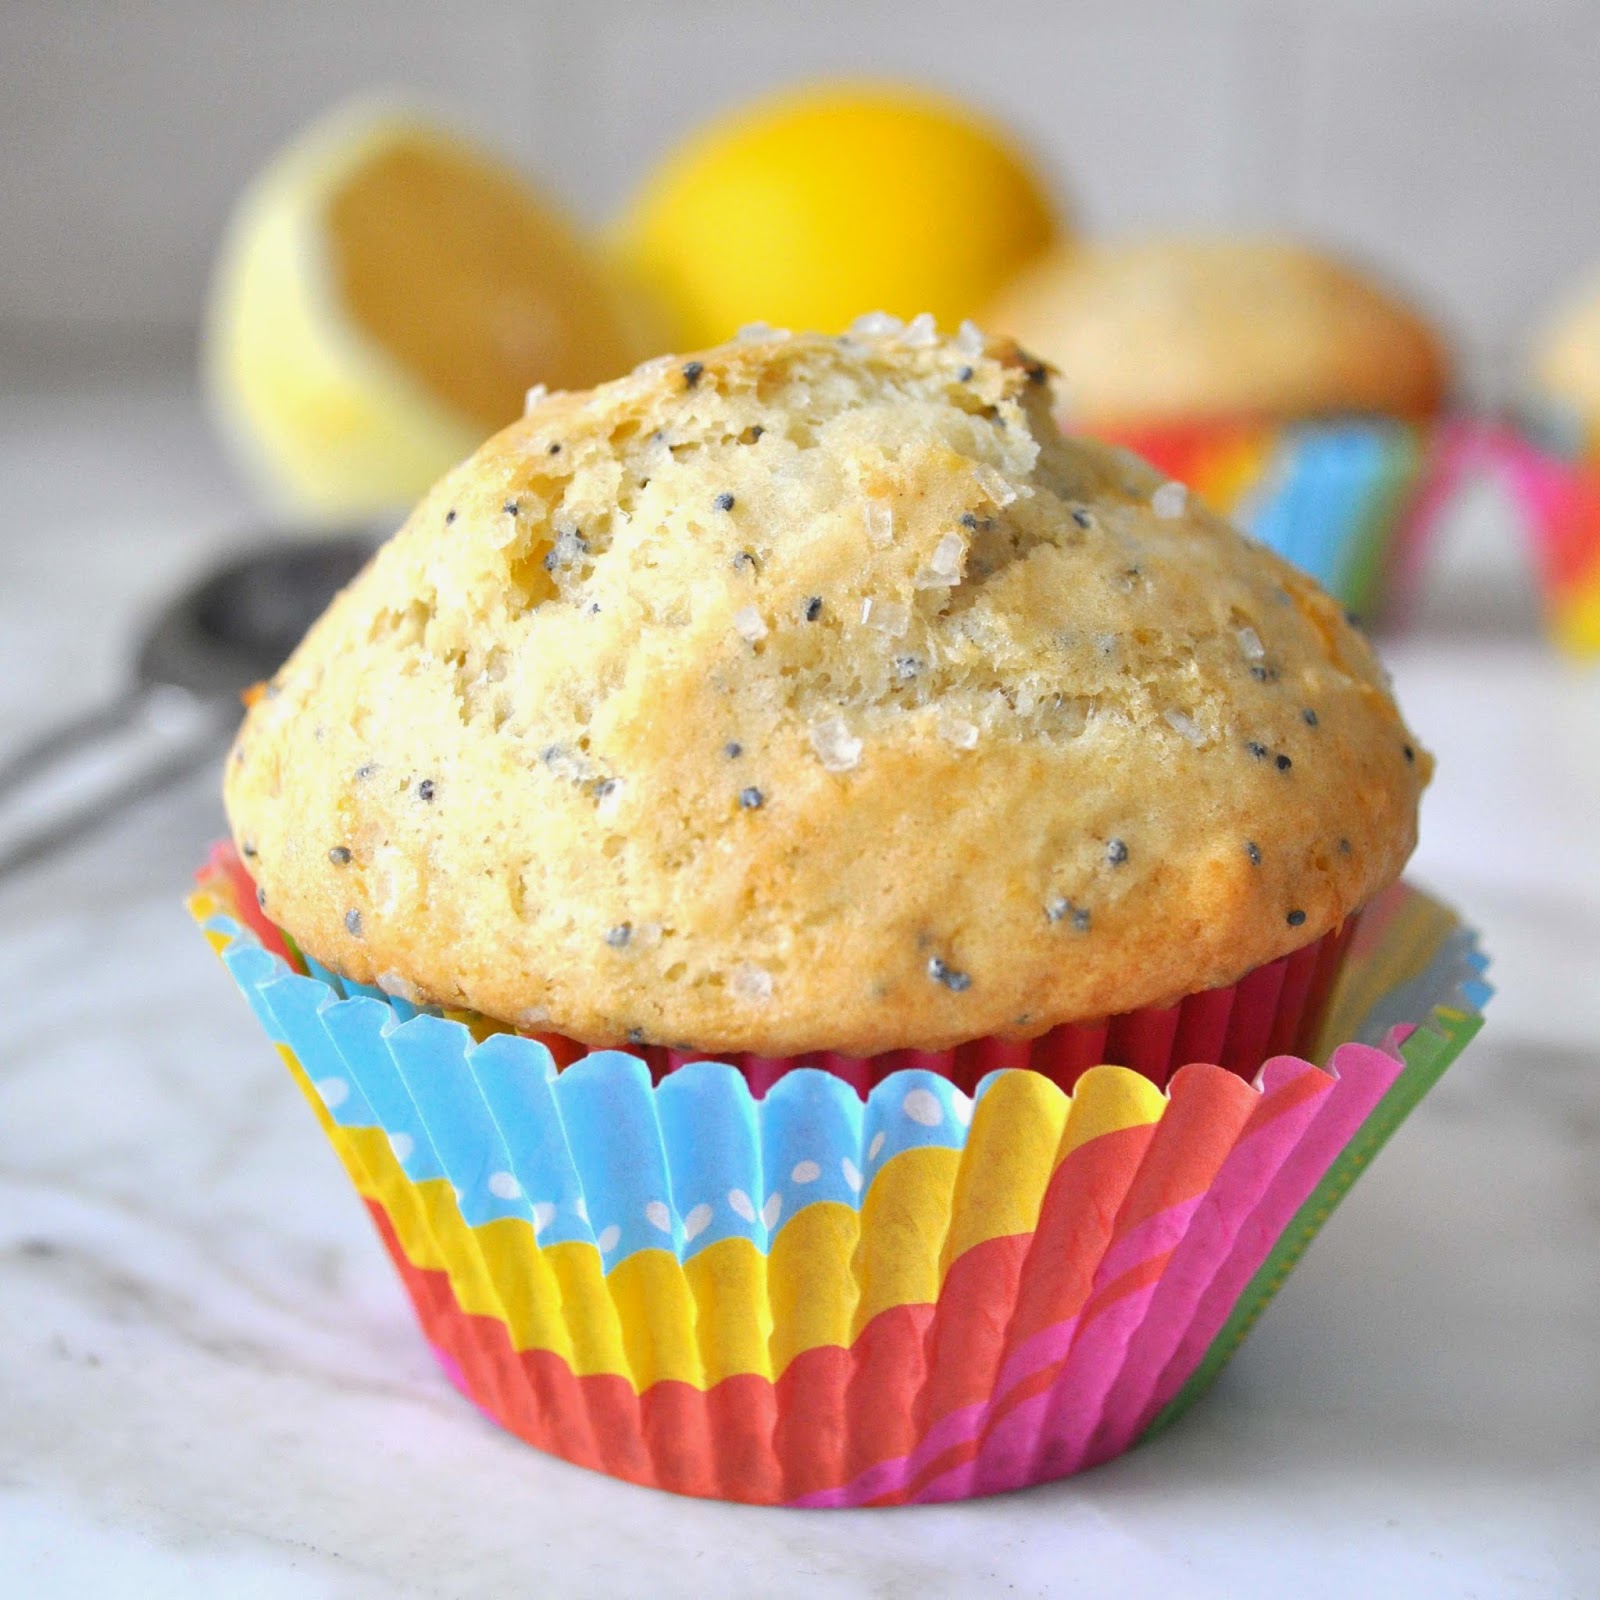 Cooking with Manuela: Homemade Lemon-Poppy Seed Muffins